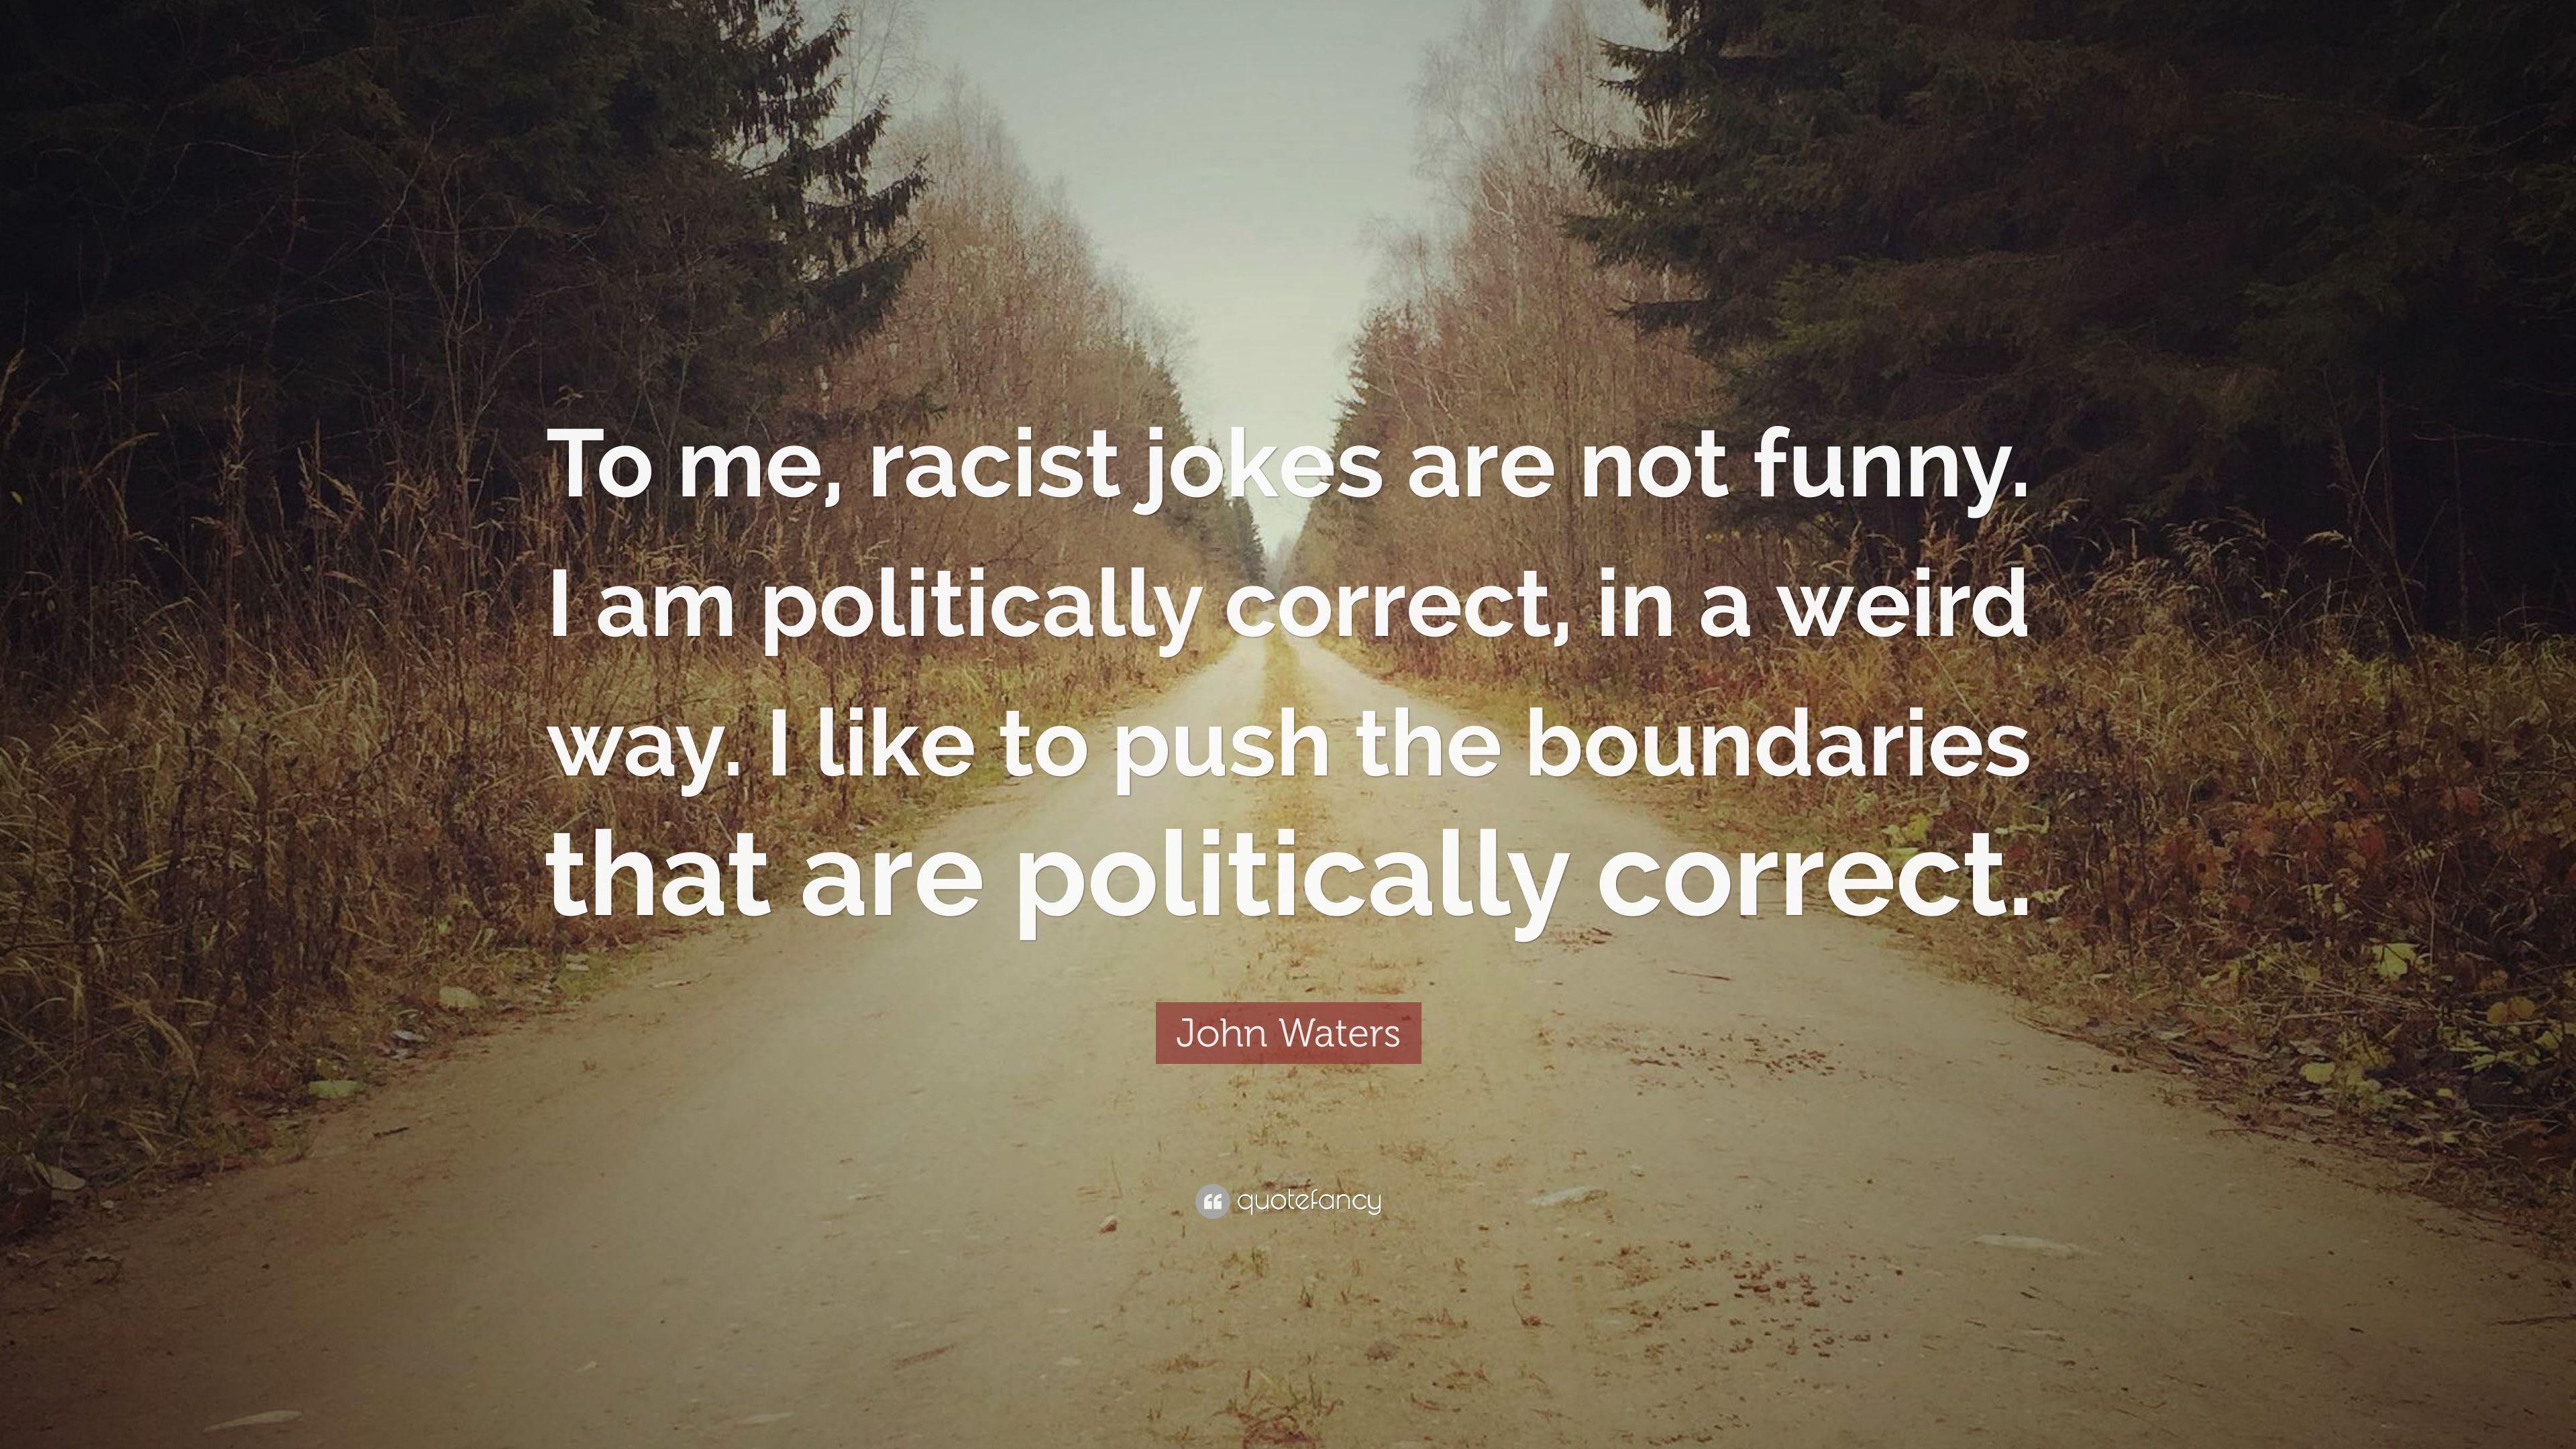 John Waters Quote: “To me, racist jokes are not funny. I am